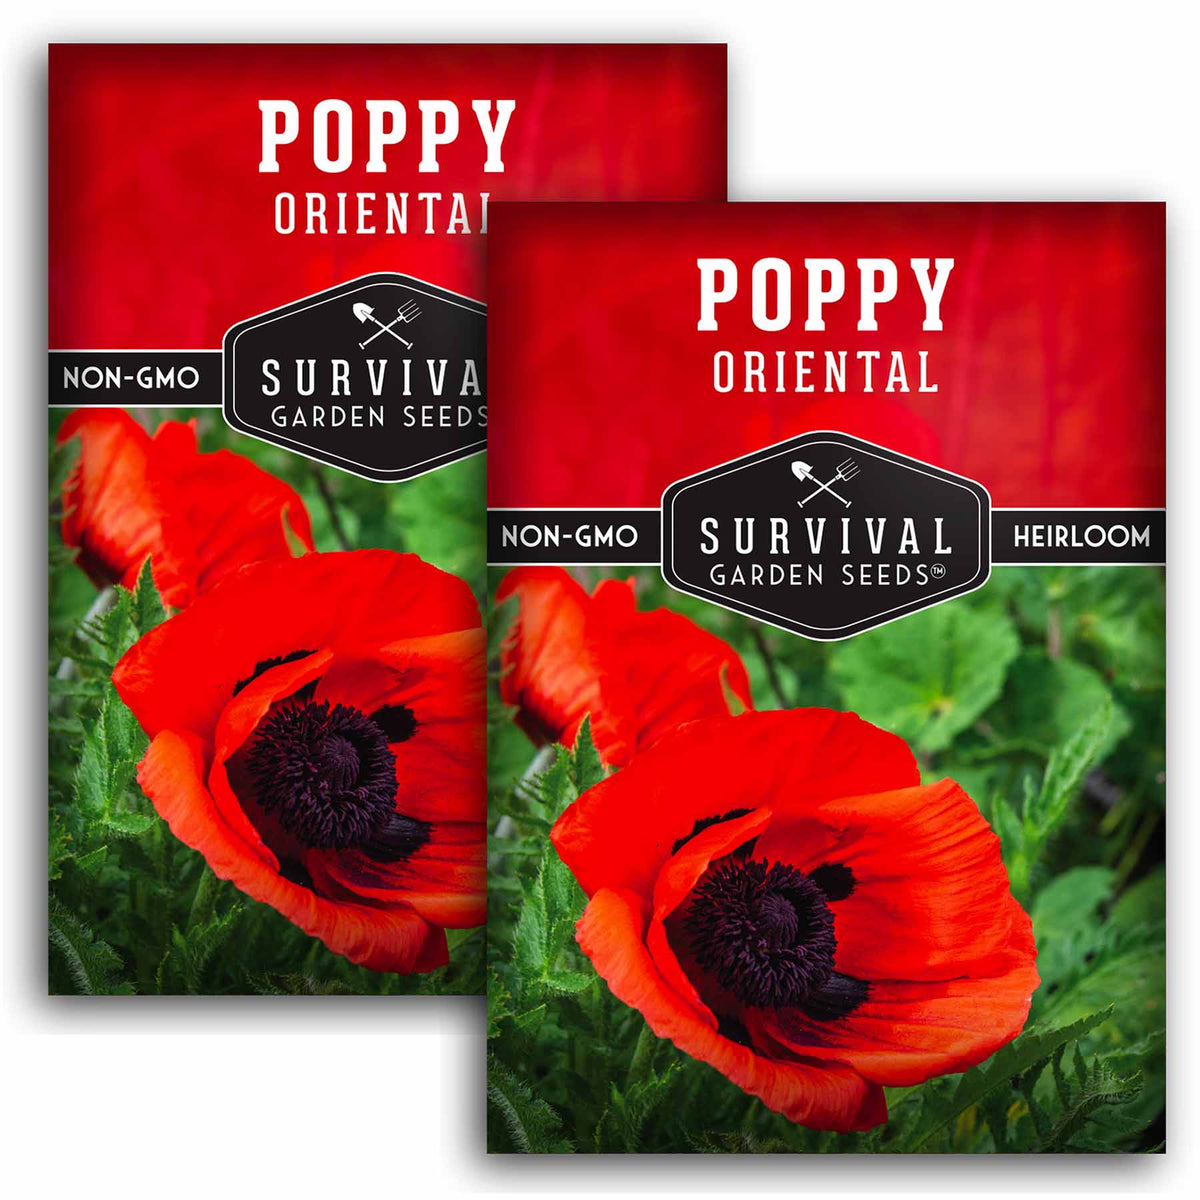 2 packets of Orient Poppy seeds